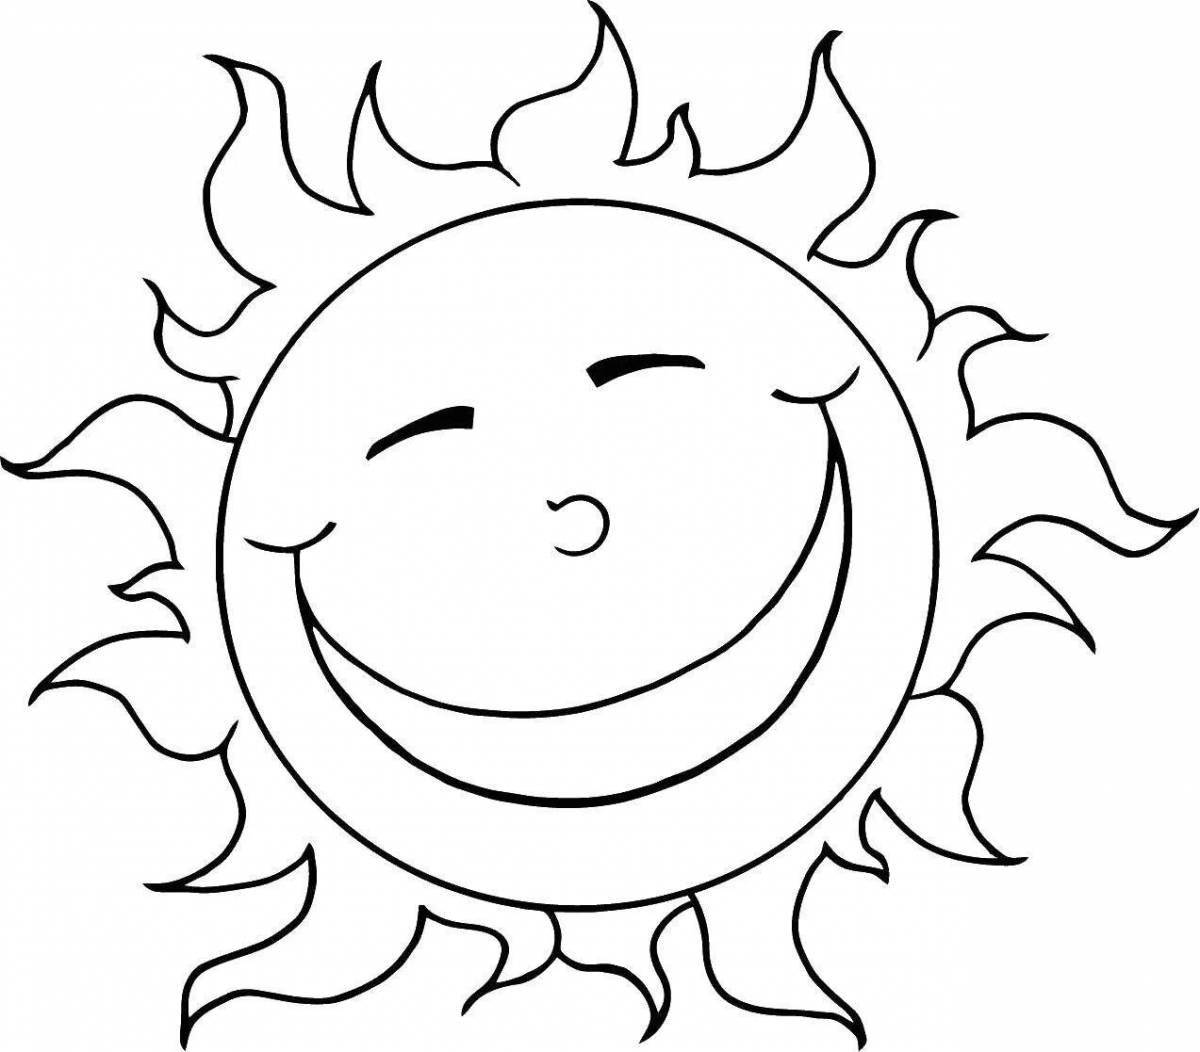 Coloring book gorgeous sun pattern